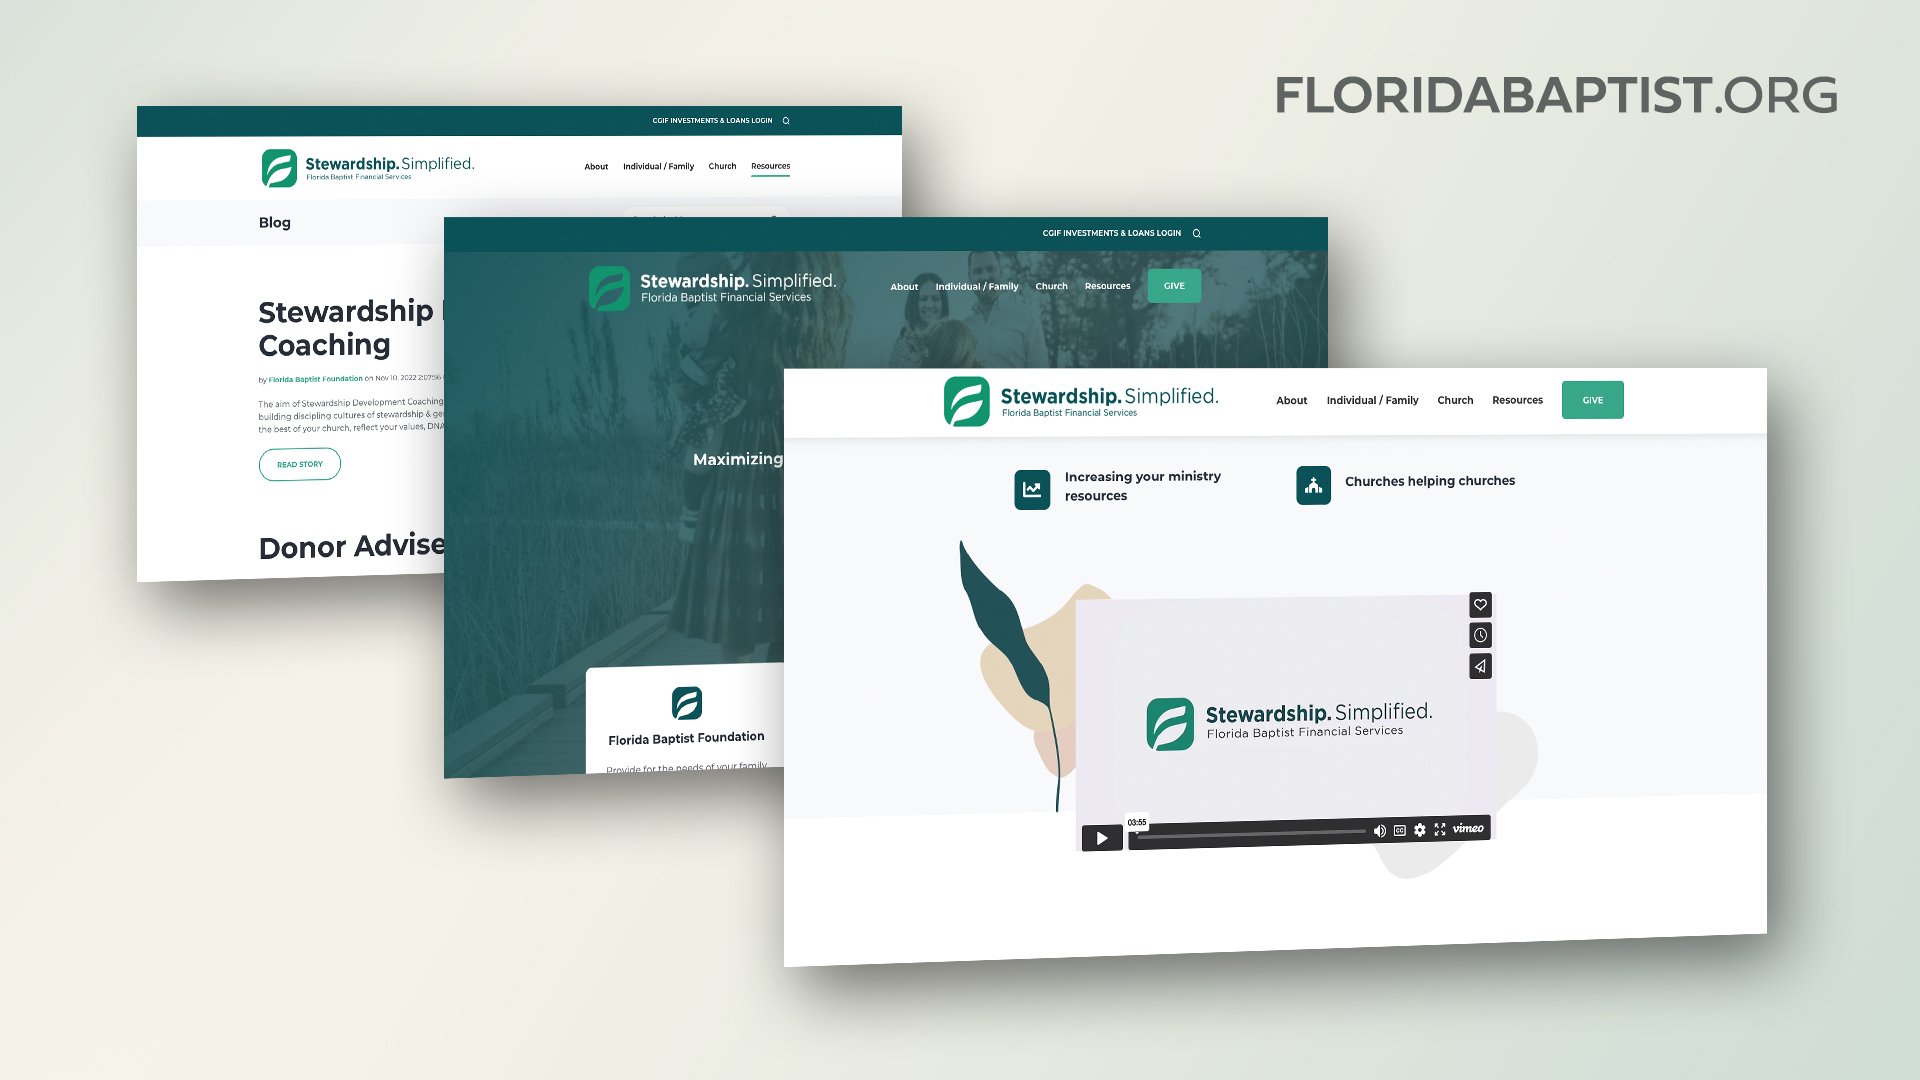 Florida Baptist by Clever